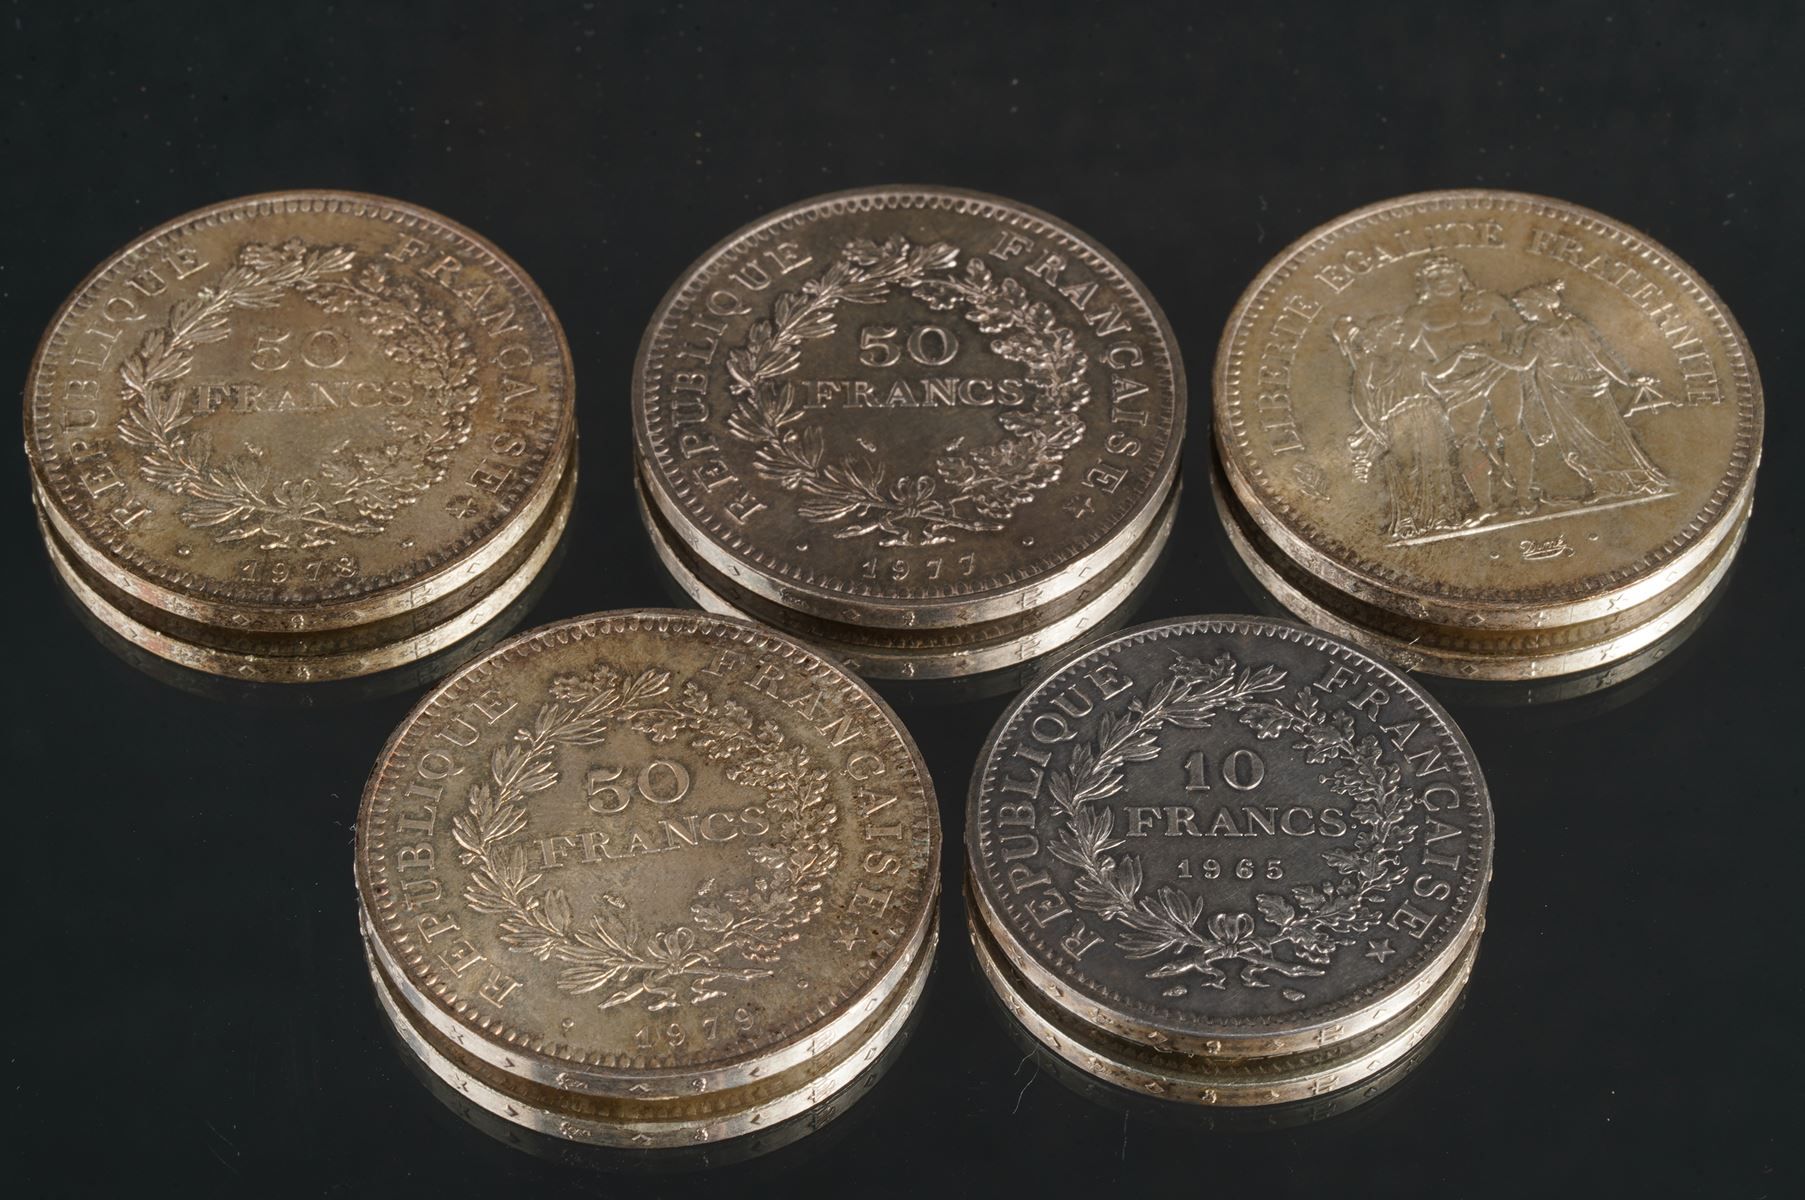 Null SILVER CURRENCIES: four 50-franc coins and one 10-franc coin. P. 144 g.